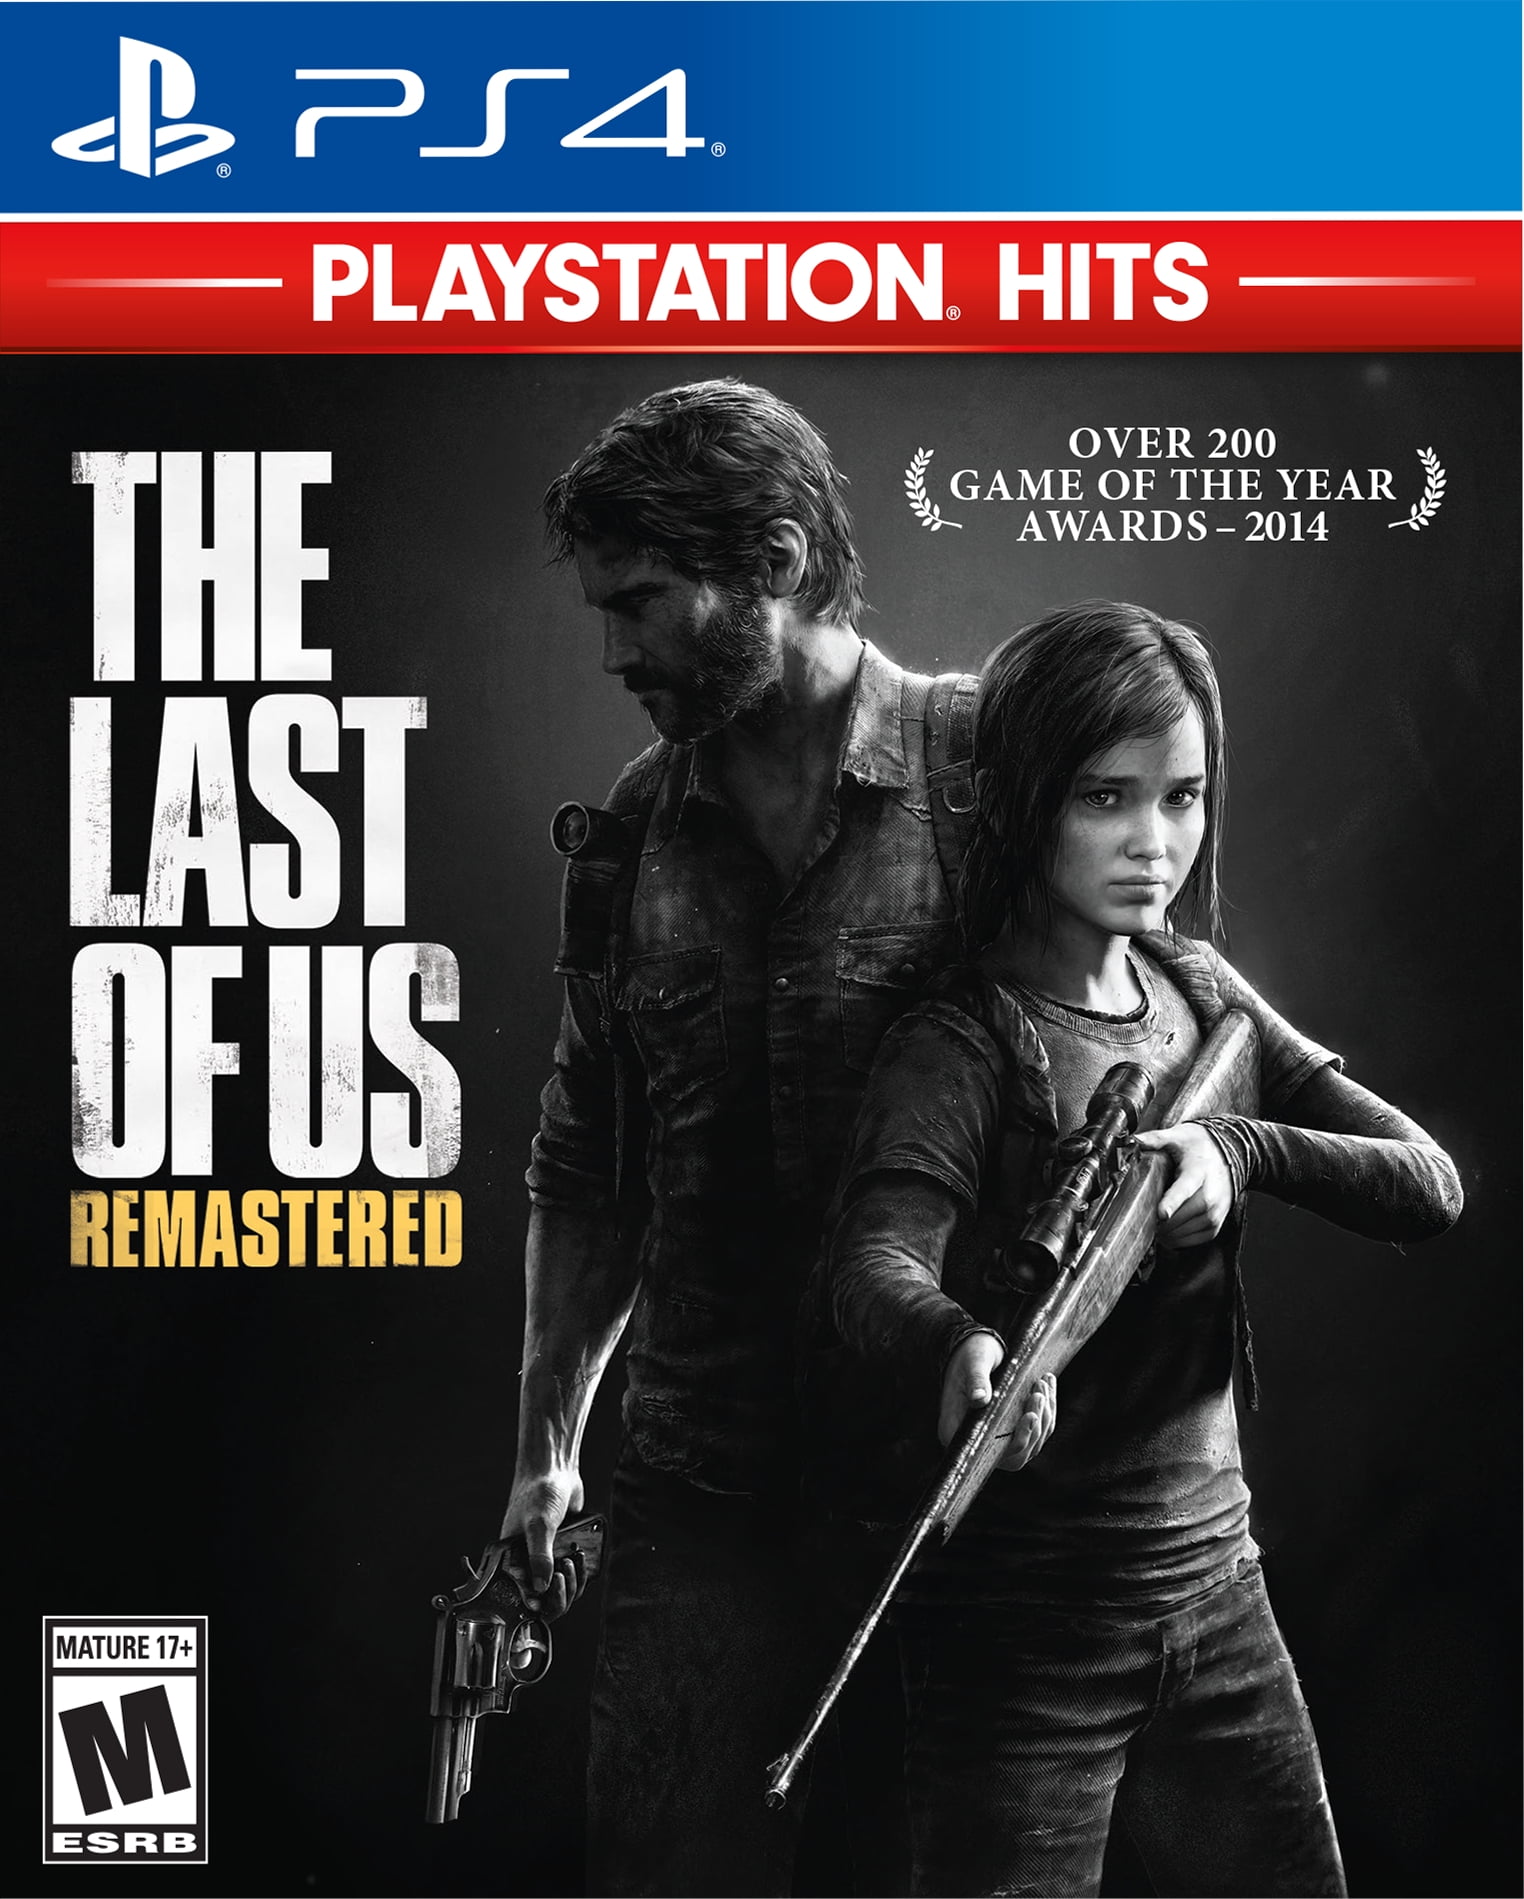 The Last Of Us No frame Left Behind Game Art Silk Poster 